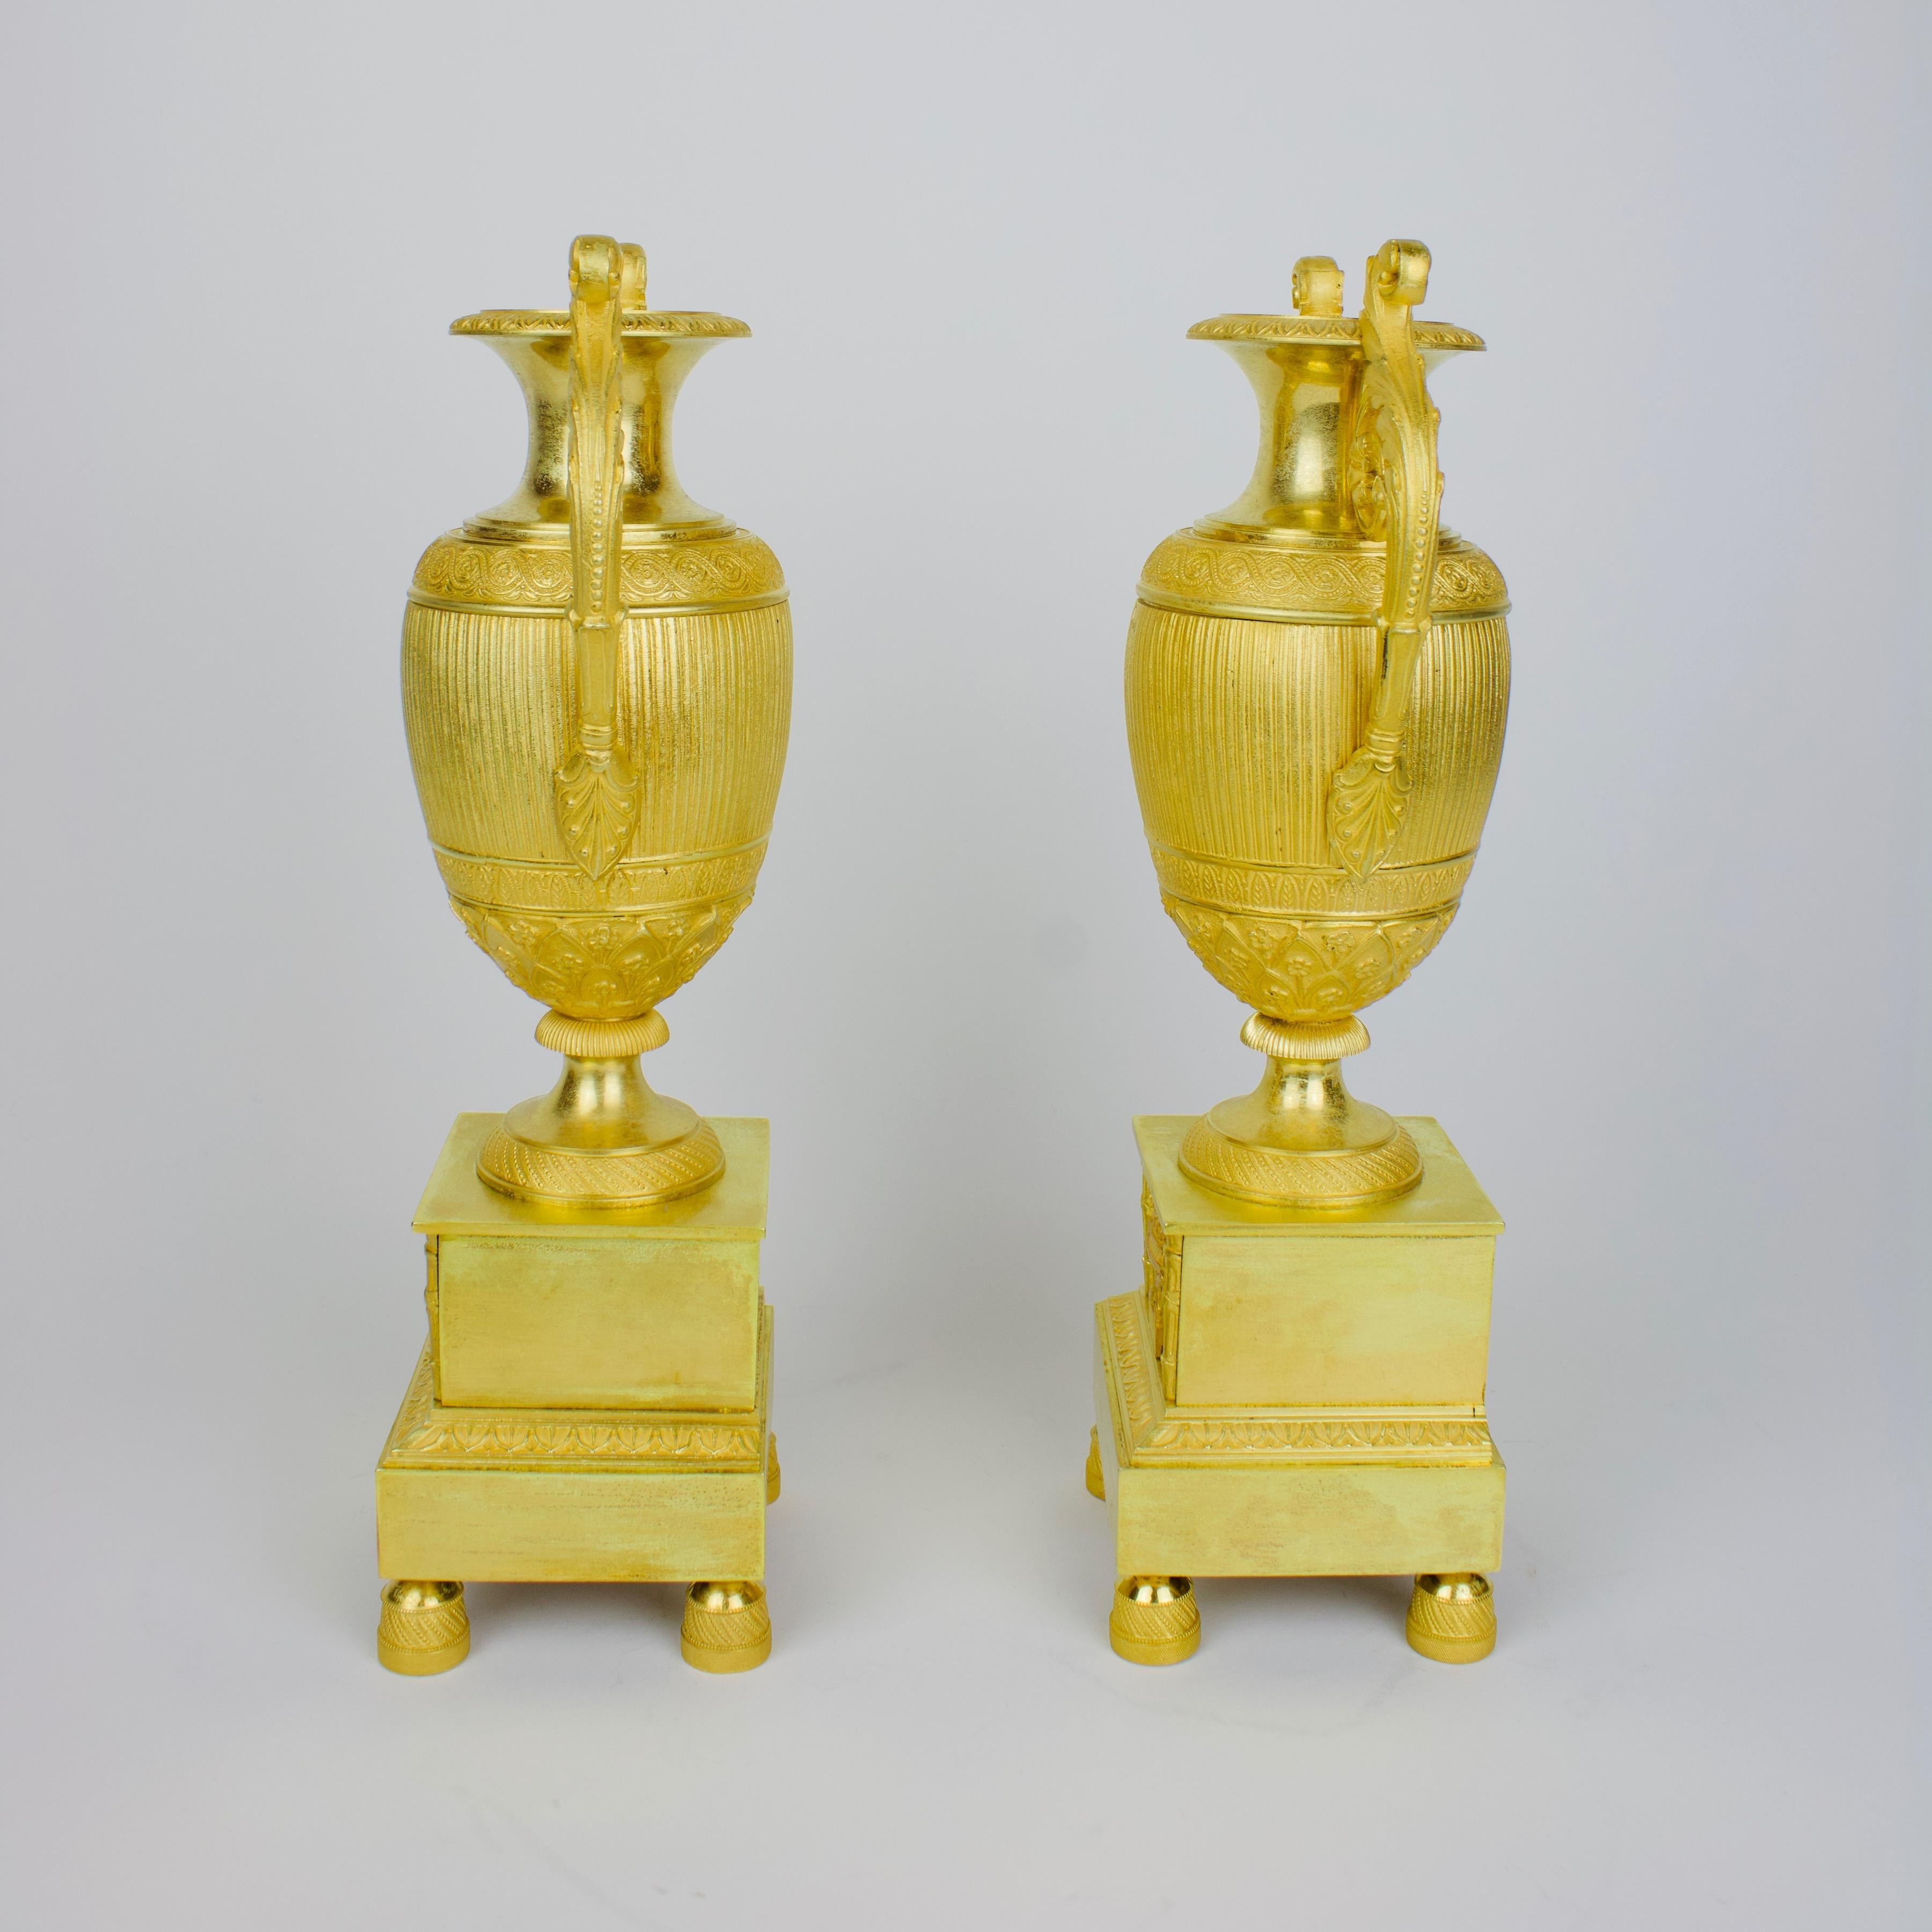 Pair of Early 19th Century empire gilt bronze neoclassical vases

Pair of early 19th century French Empire gilt bronze amphora vases:
each amphora vase with an ovoid fluted body and a round foot standing on a high rectangular pedestal with toupie